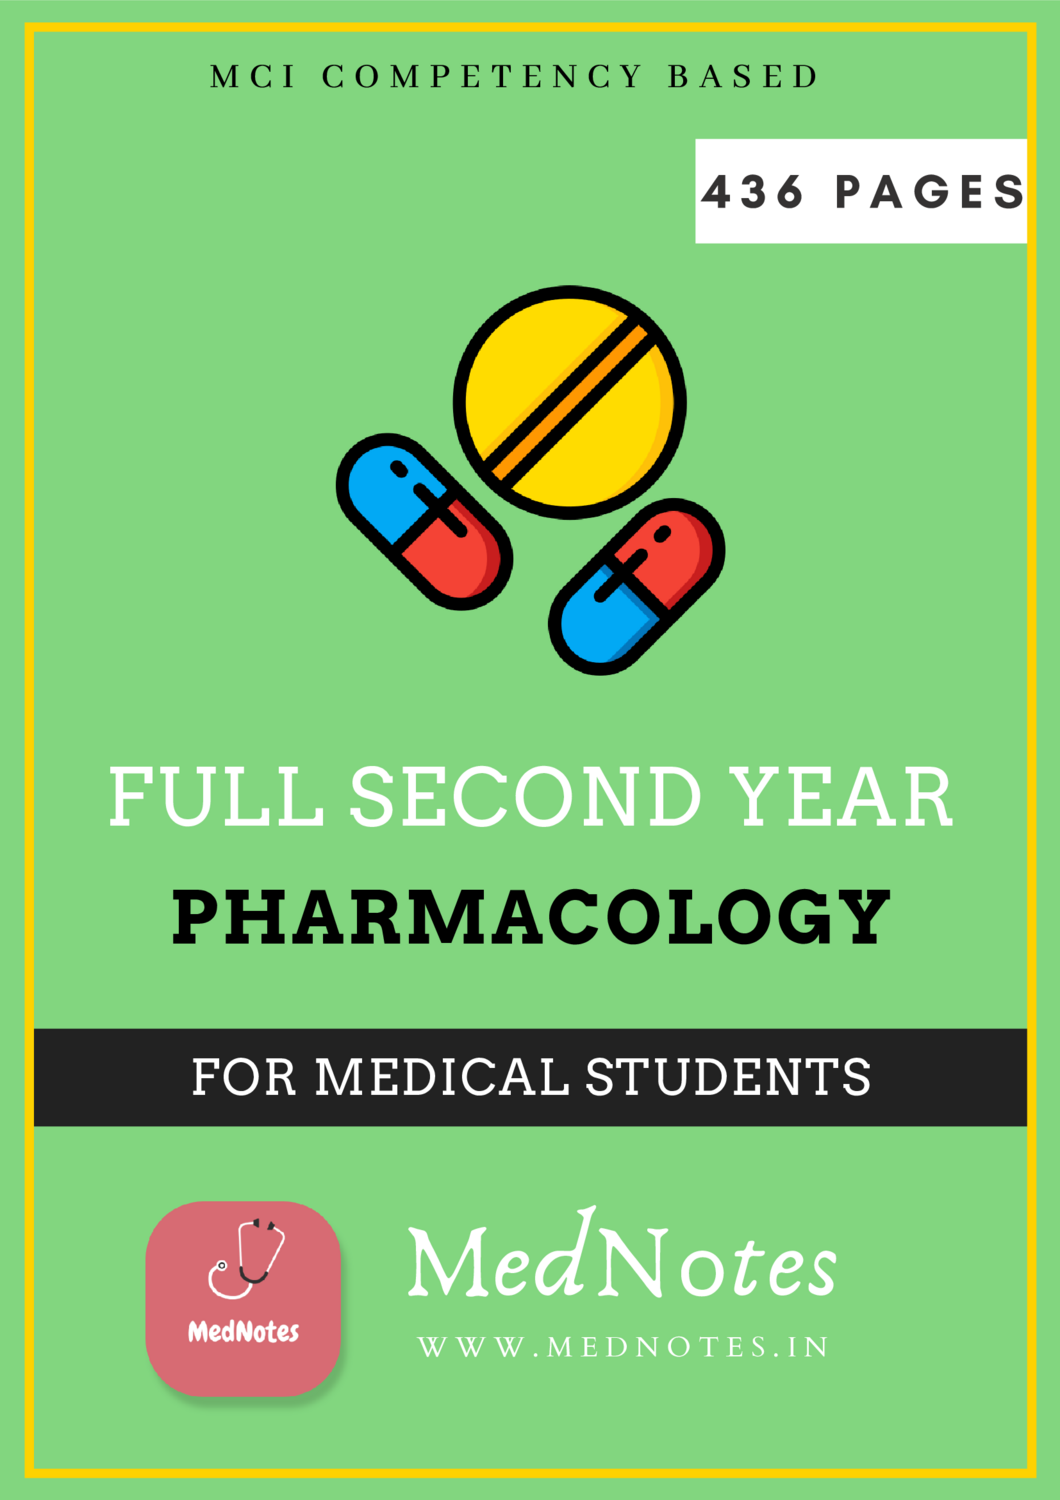 Full Second Year Pharmacology - MedNotes Ebook